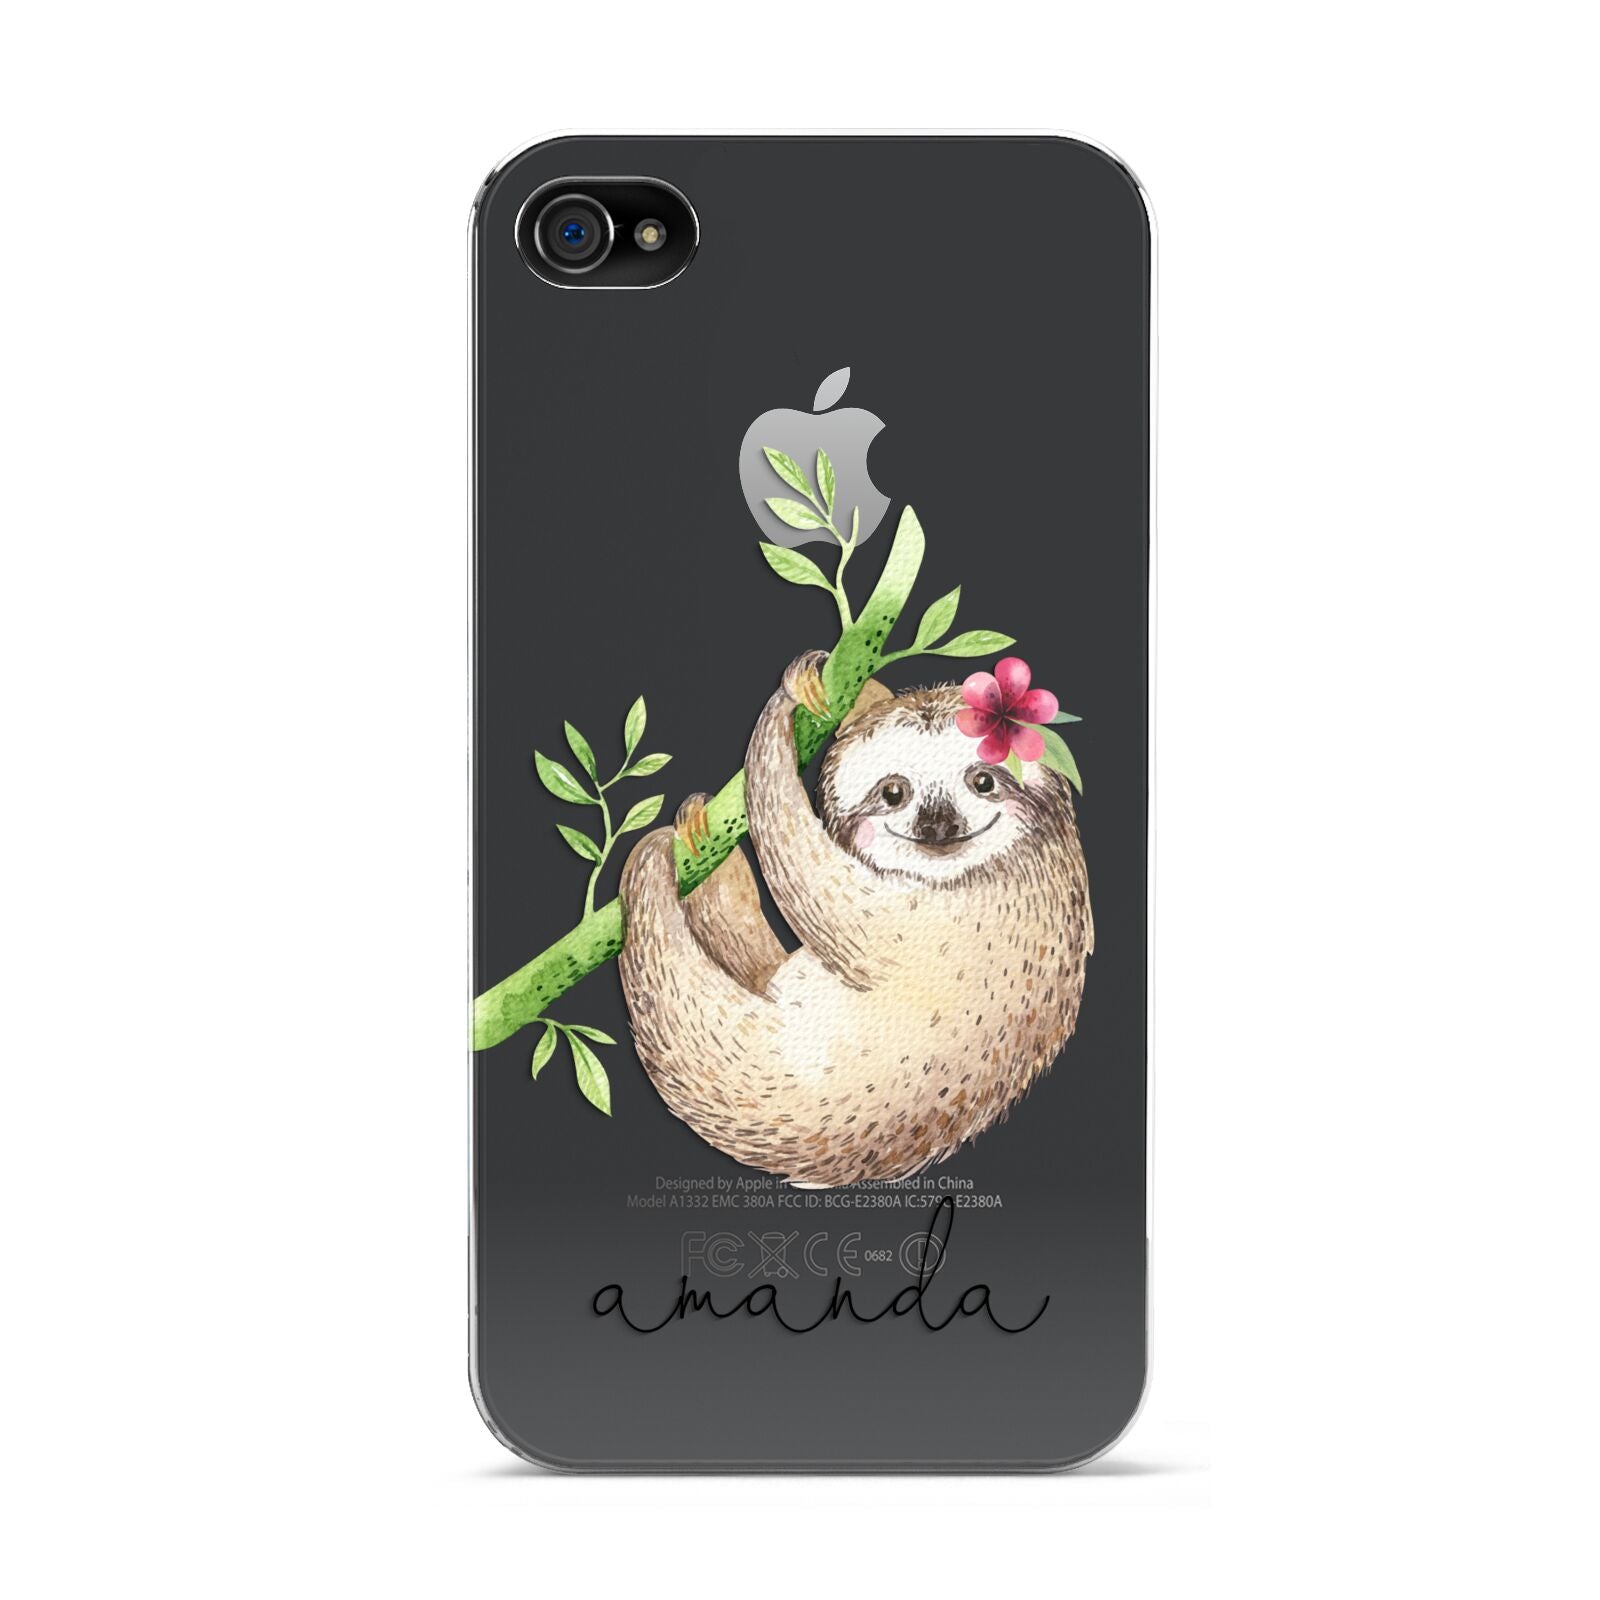 Personalised Sloth Apple iPhone 4s Case